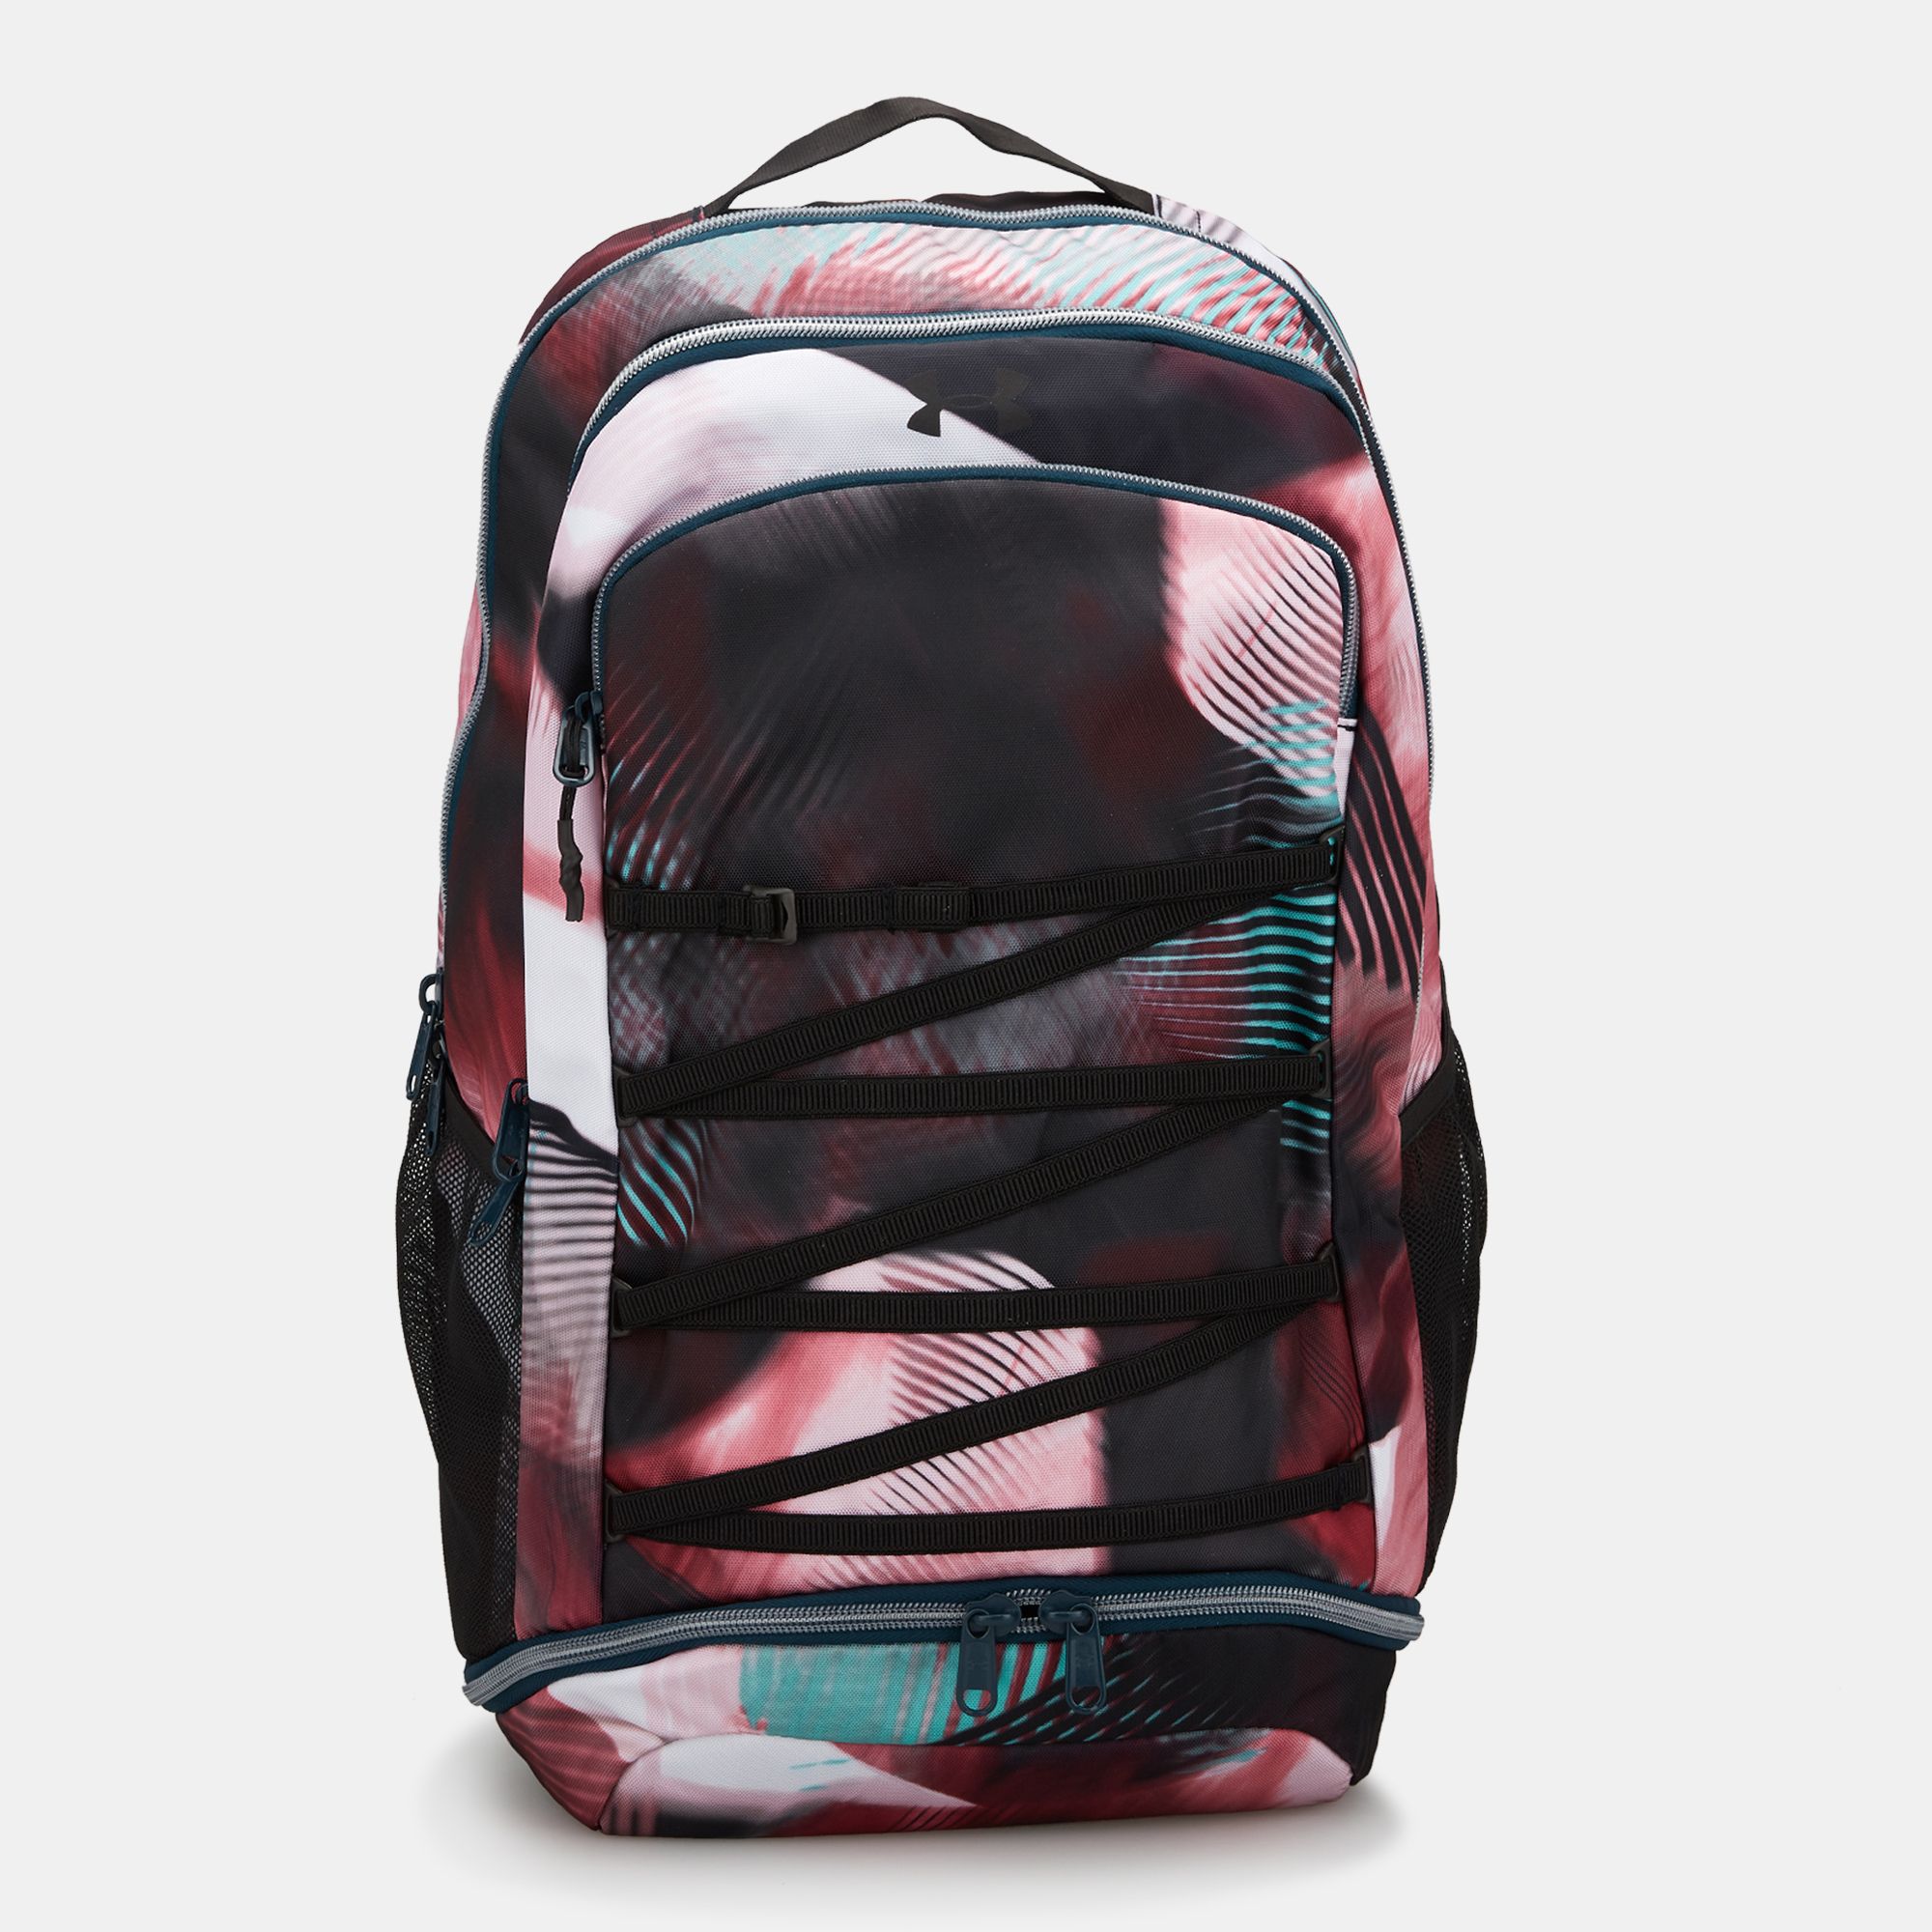 Under Armour Women's Imprint Backpack 